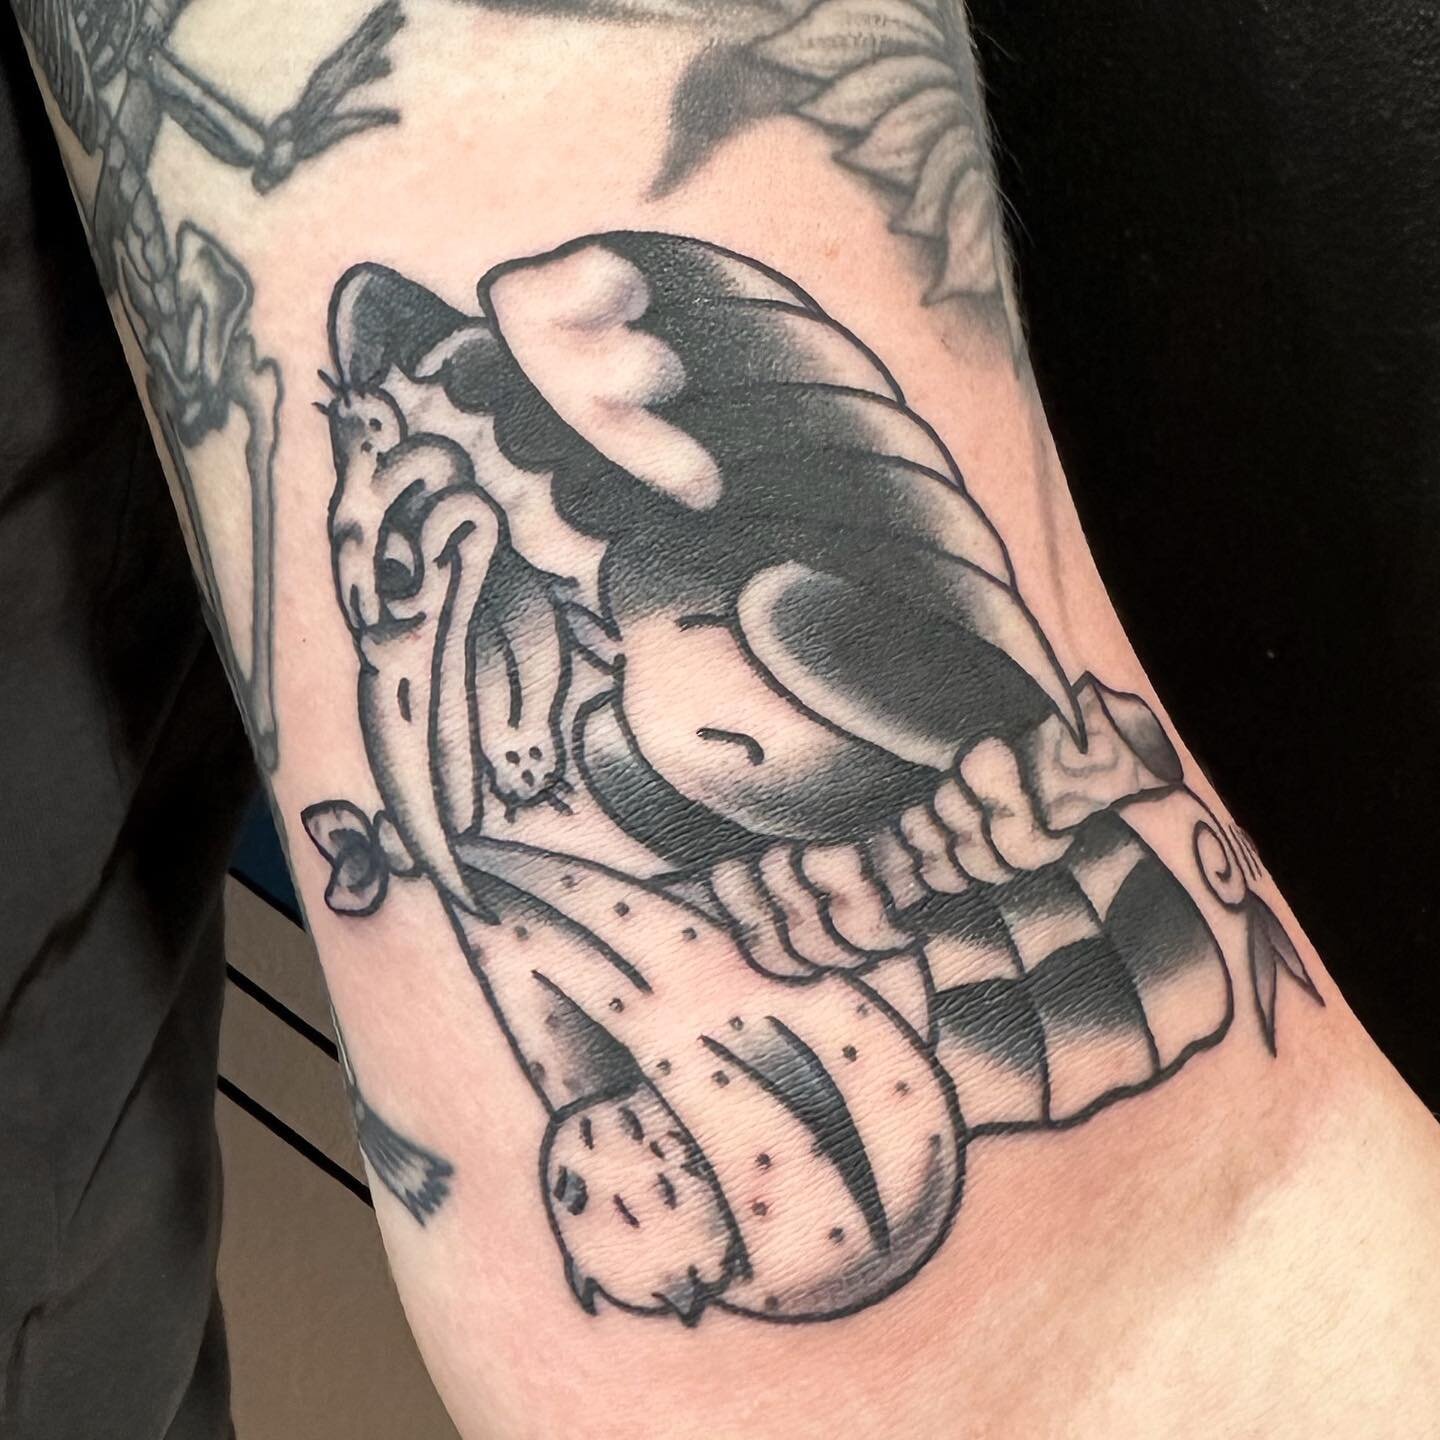 ☁️✨Vulture + Baby✨☁️ for the wonderful @rebgirard! Thank you for making the trip out and trust. #vulture #vulturetattoo #tattoo #tattoos #kankakee #kankakeecounty #kankakeetattoo #bradleyillinois #illinoistattoo #chicagotattoo